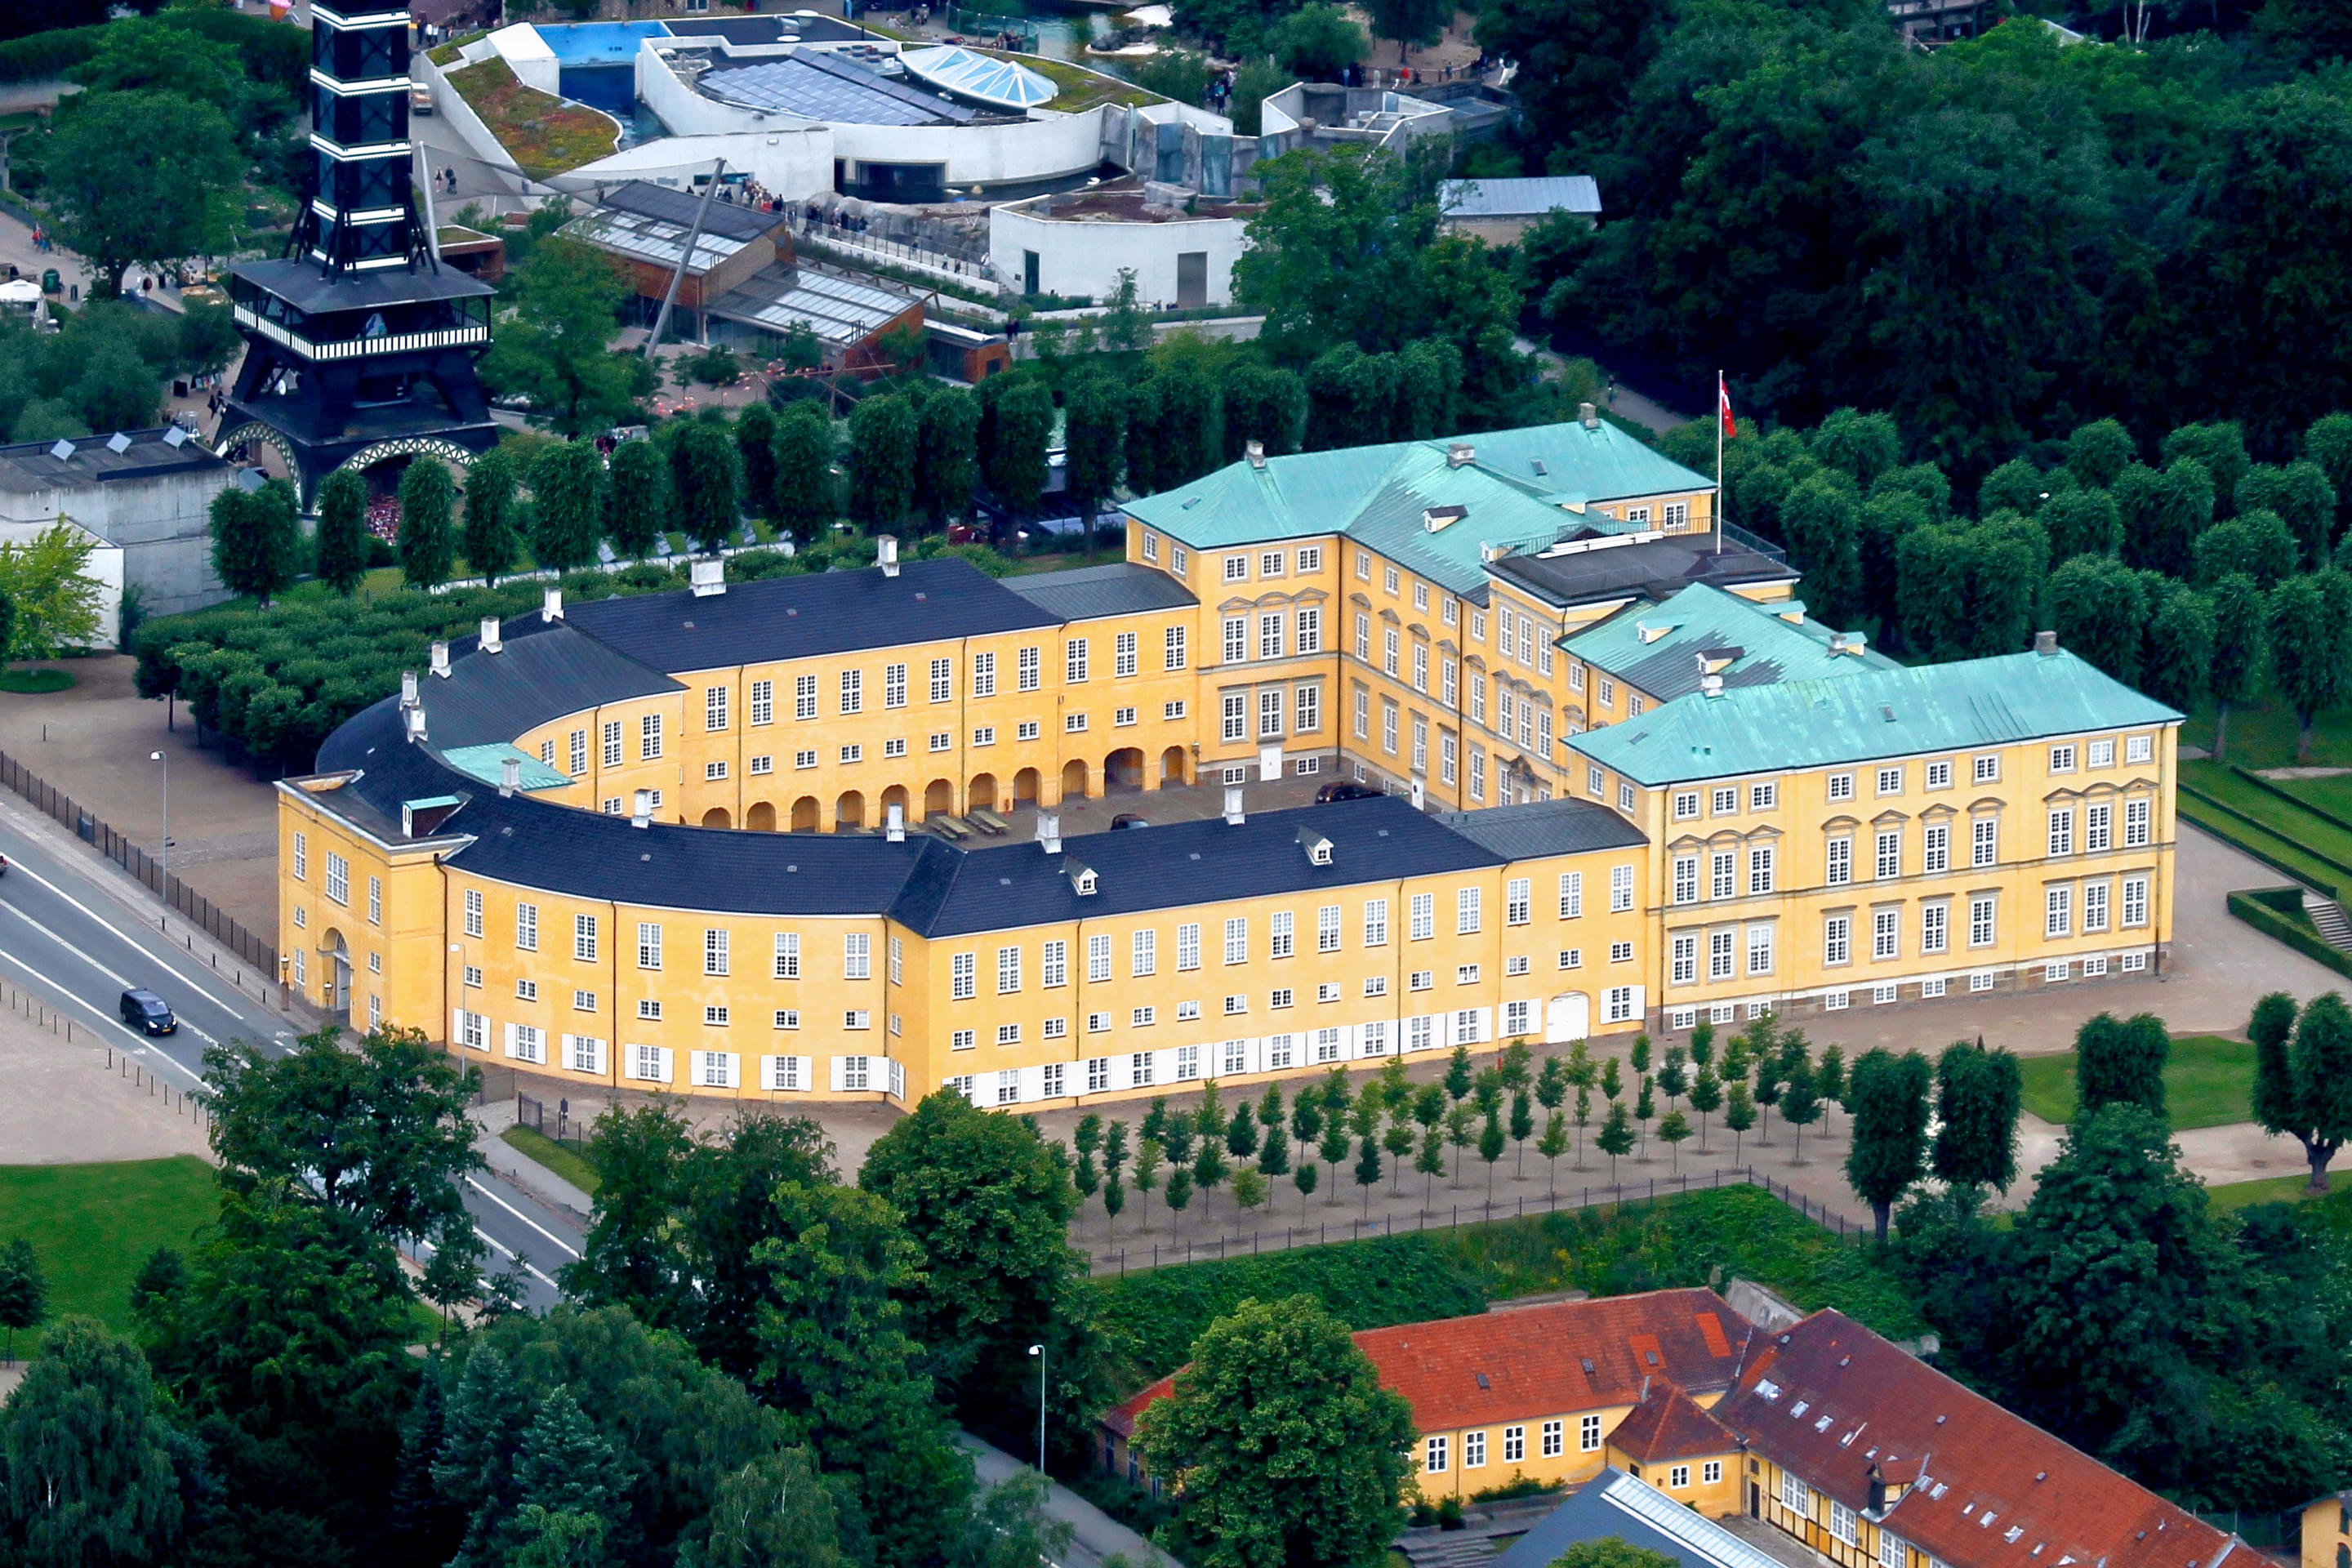 Frederiksberg Palace Overview